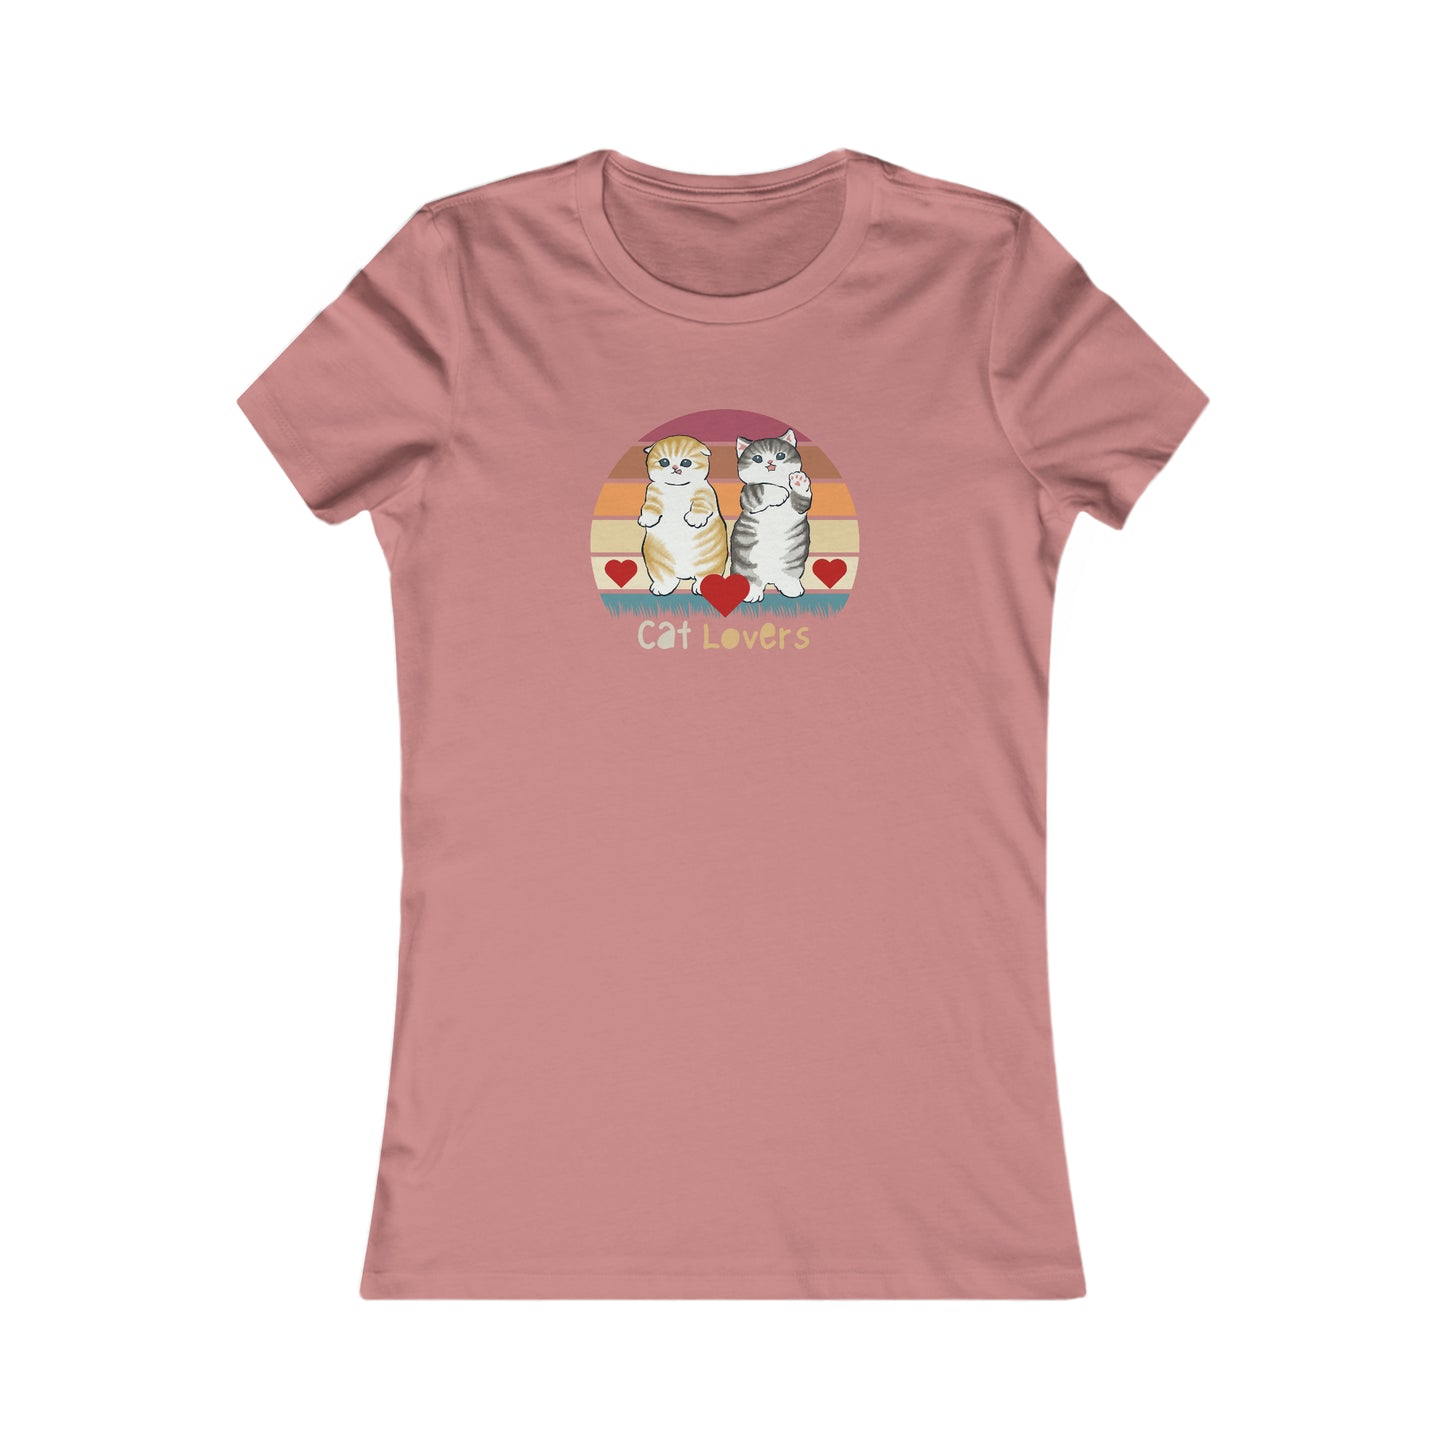 Retro style designed for "cat lovers” at the center of this Women's Favorite Tee design. Slim fit so please check the size table.